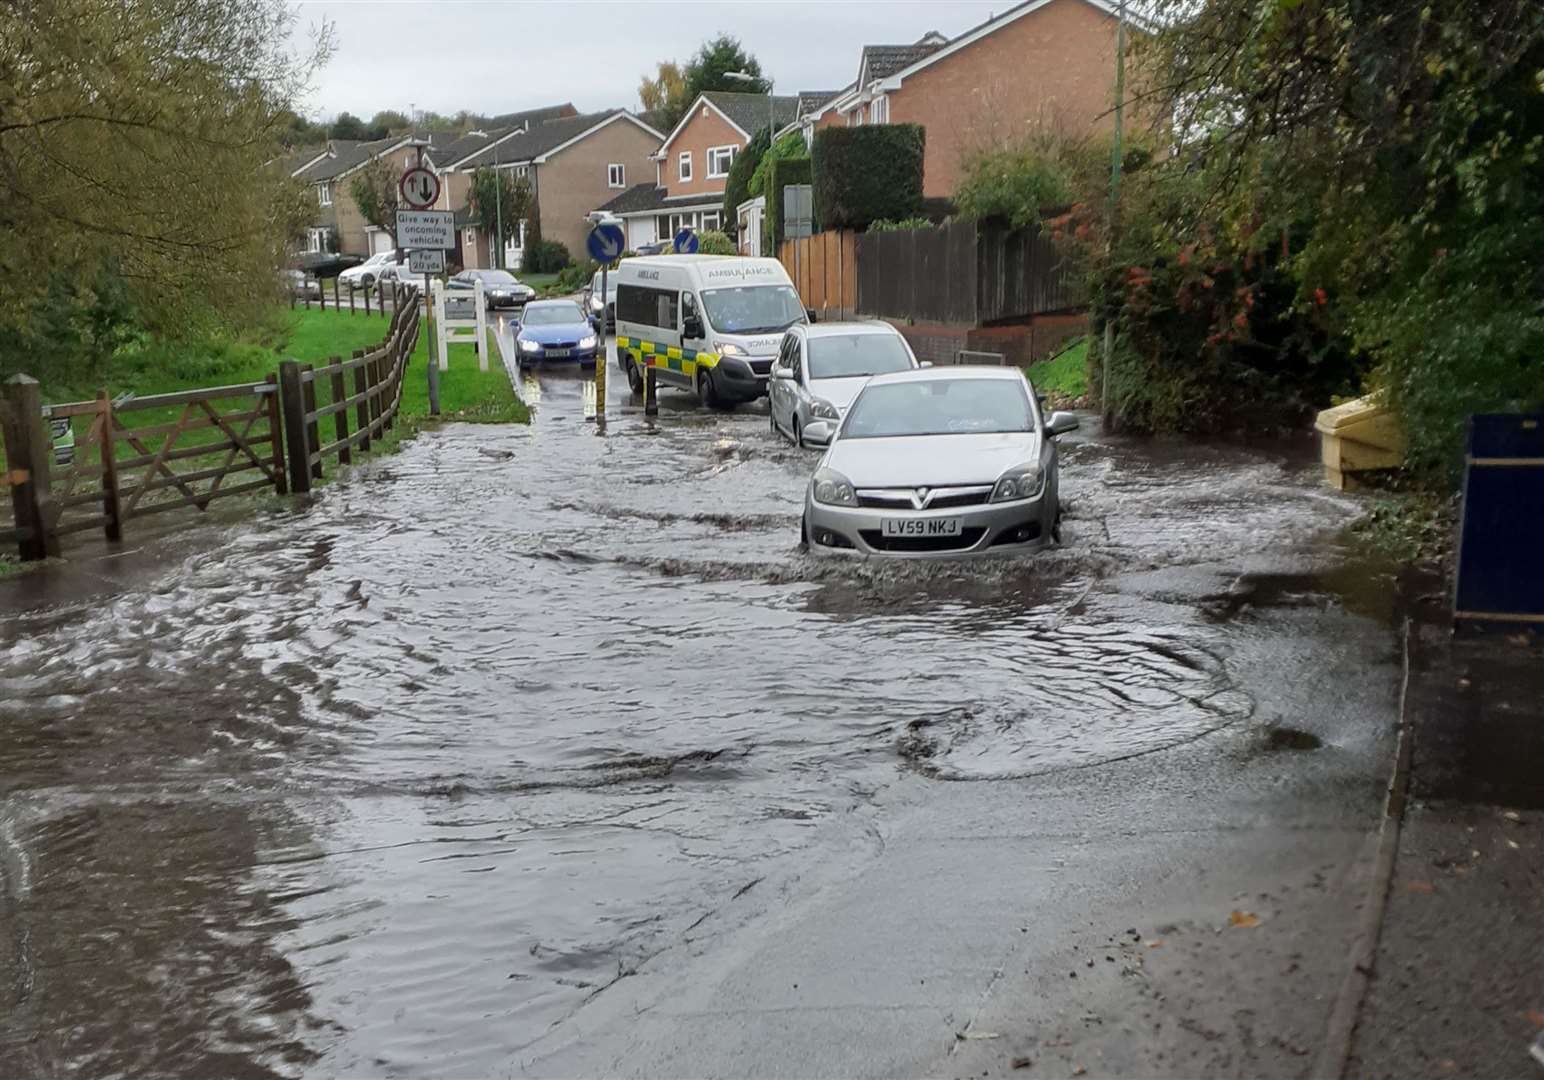 Cars were under water in Spot Lane, Maidstone. Picture from November 3